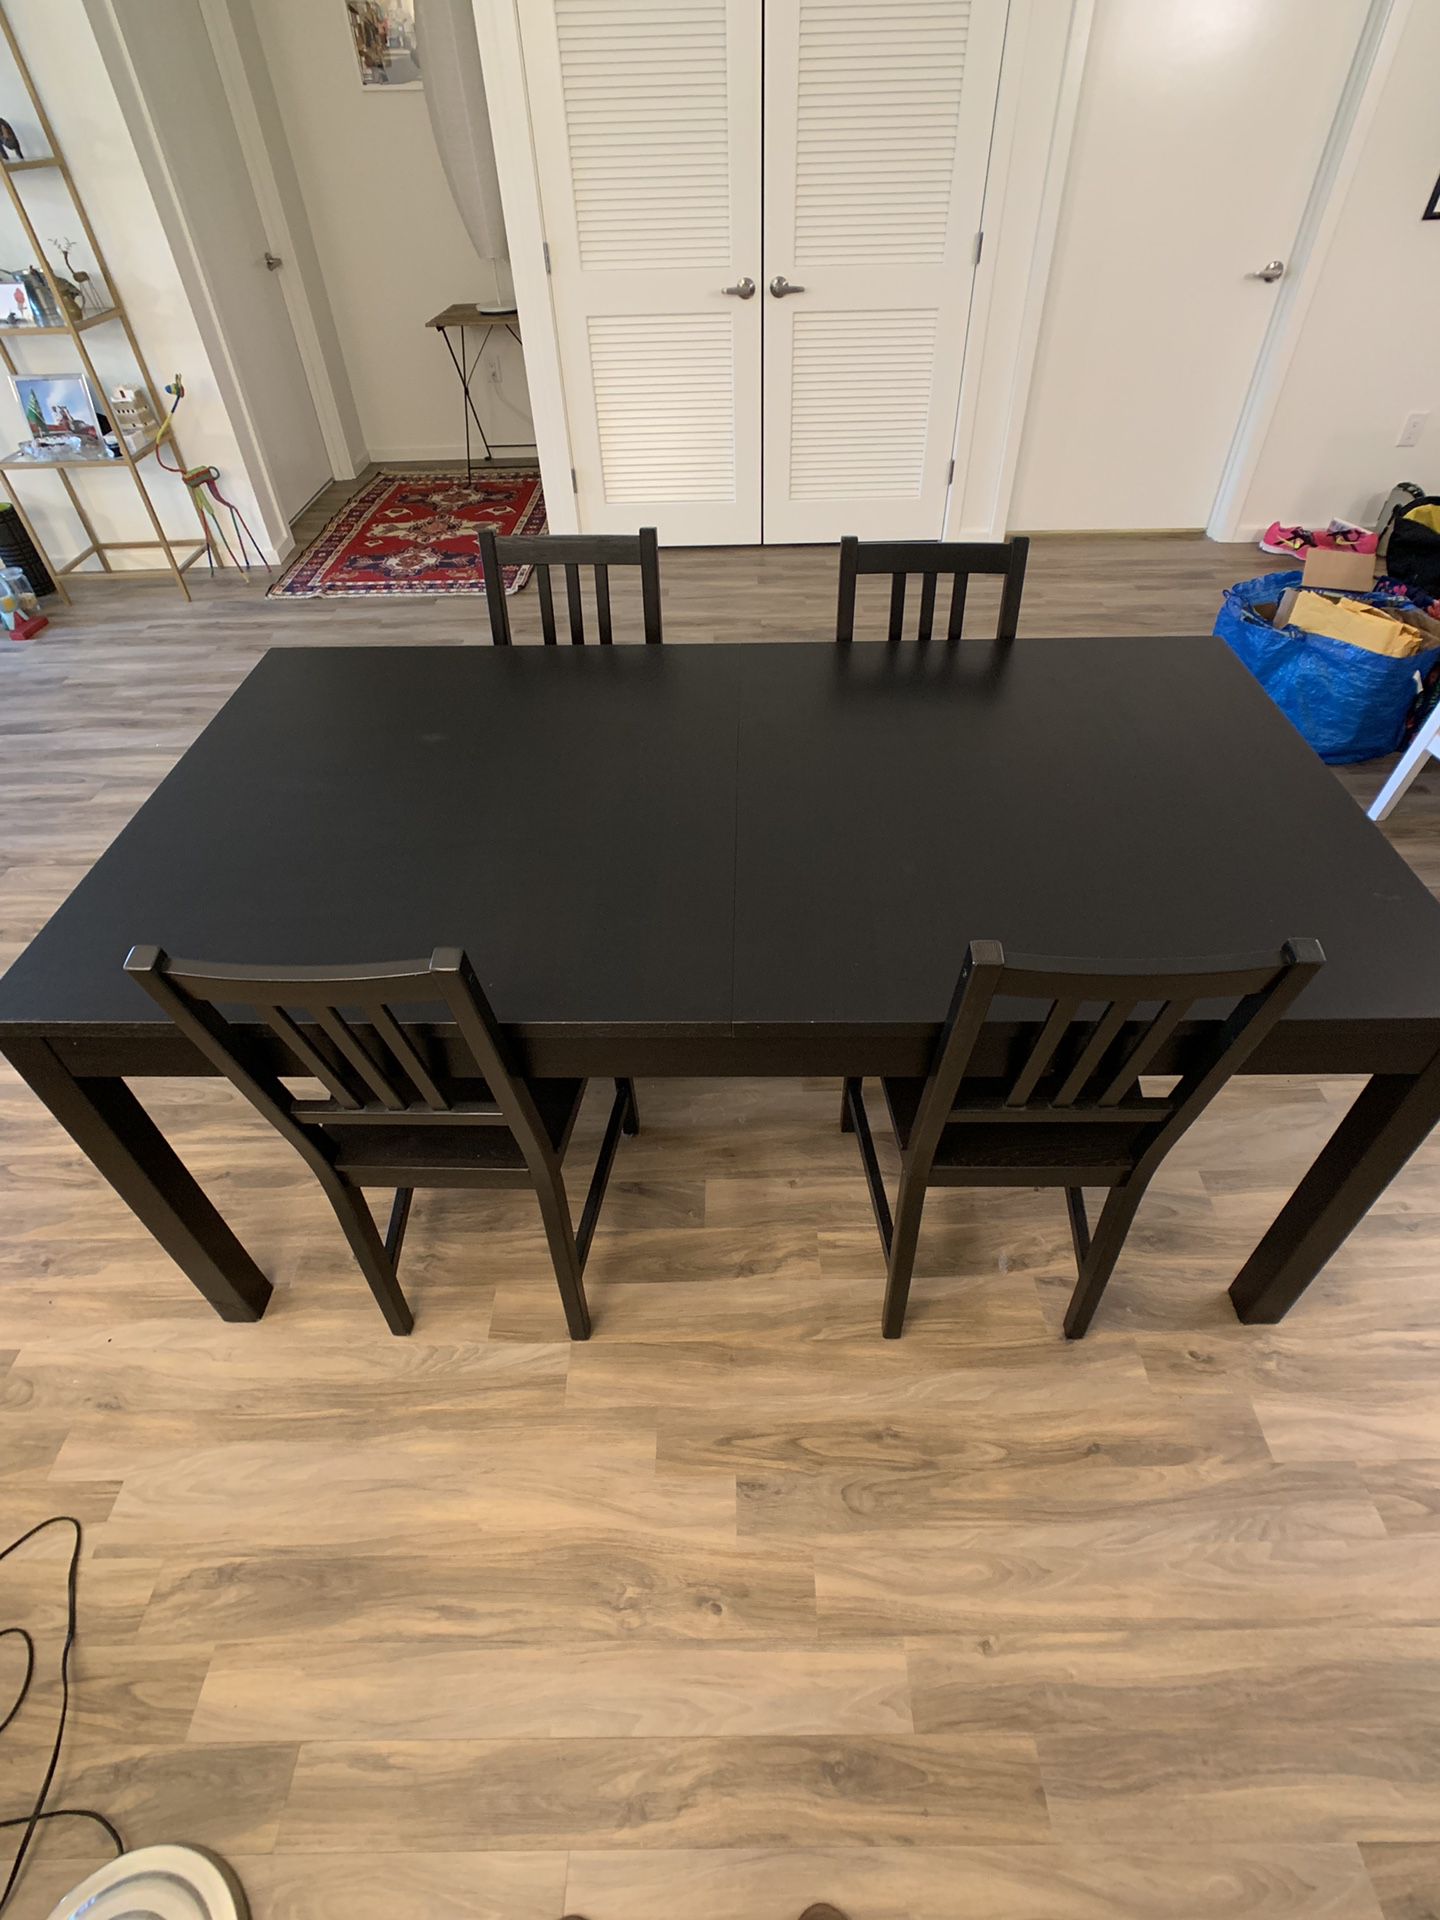 Ikea Bjursta table and four chairs